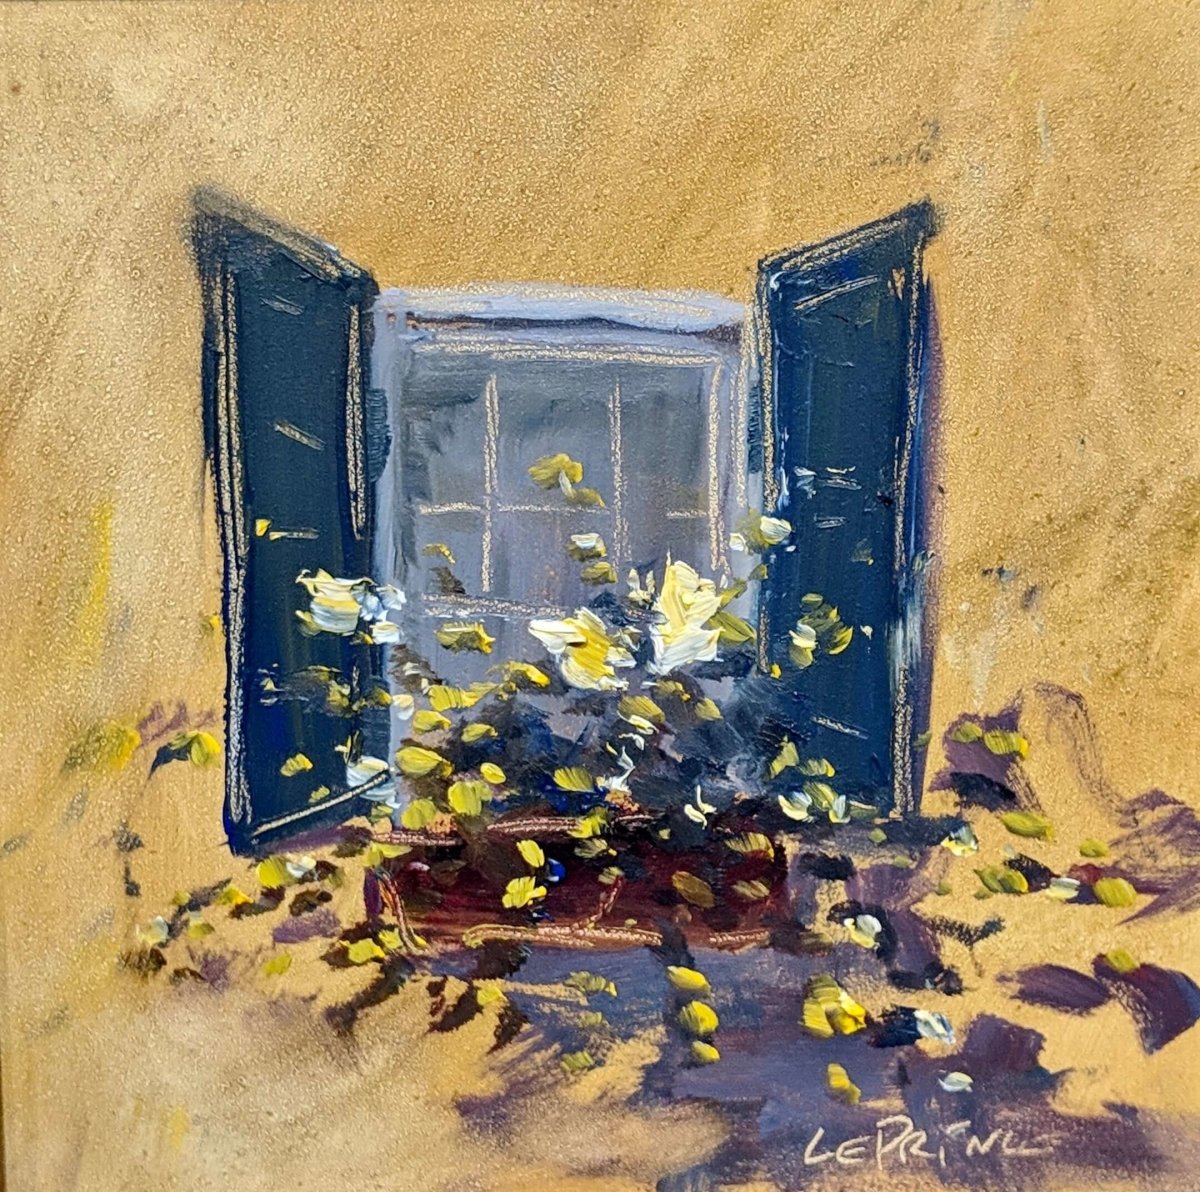 Window Box Wonder by Kevin LePrince at LePrince Galleries